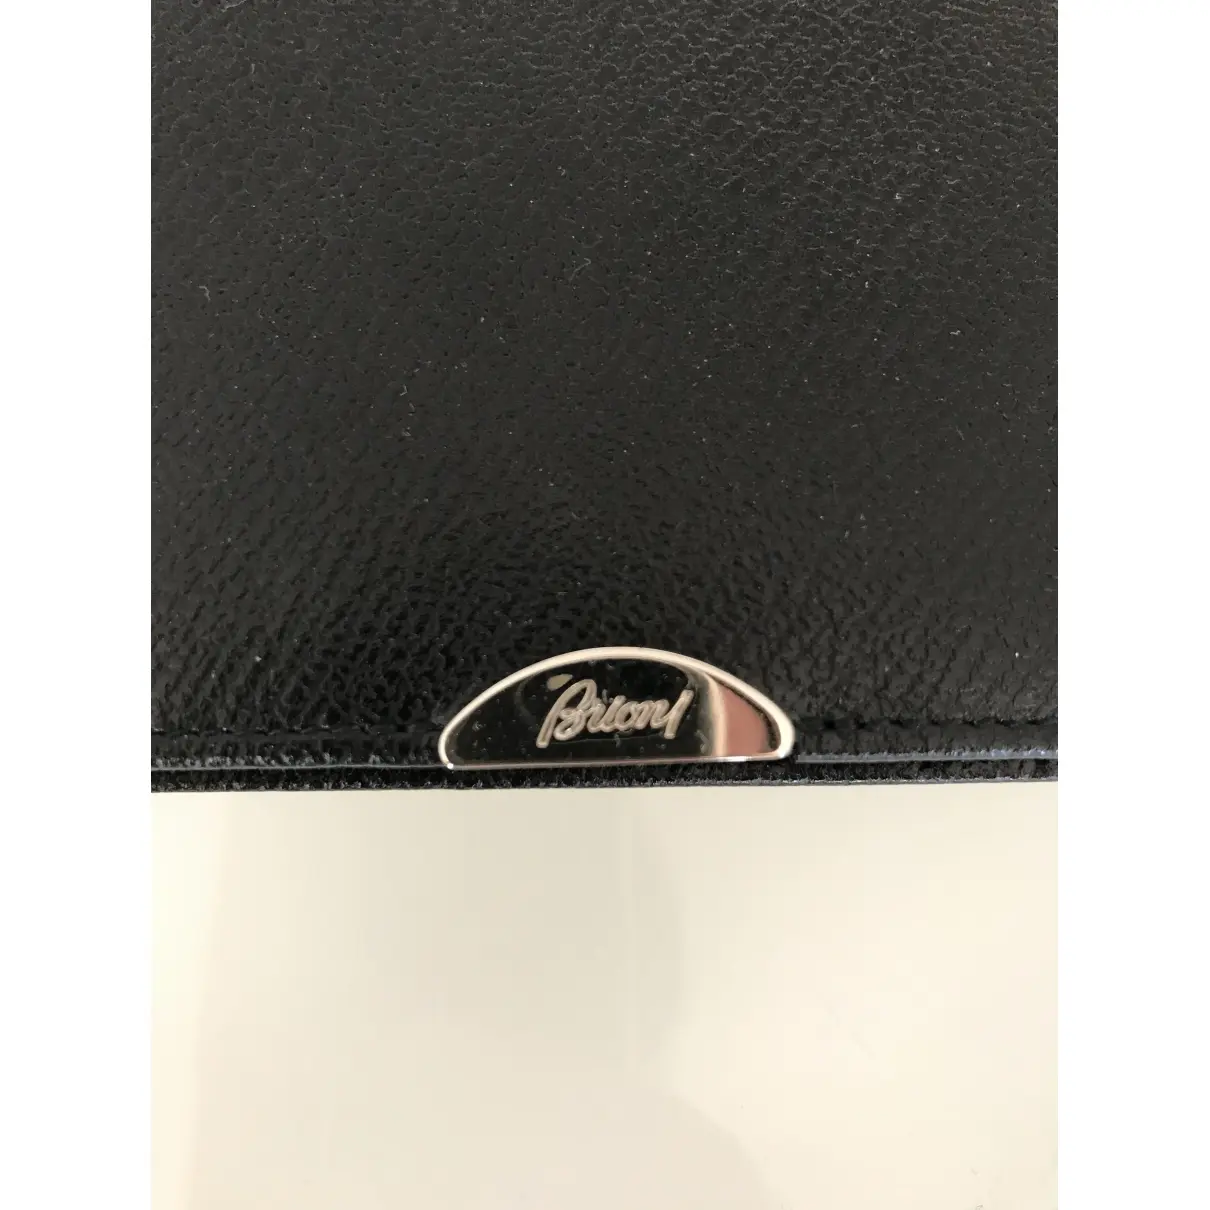 Buy Brioni Leather small bag online